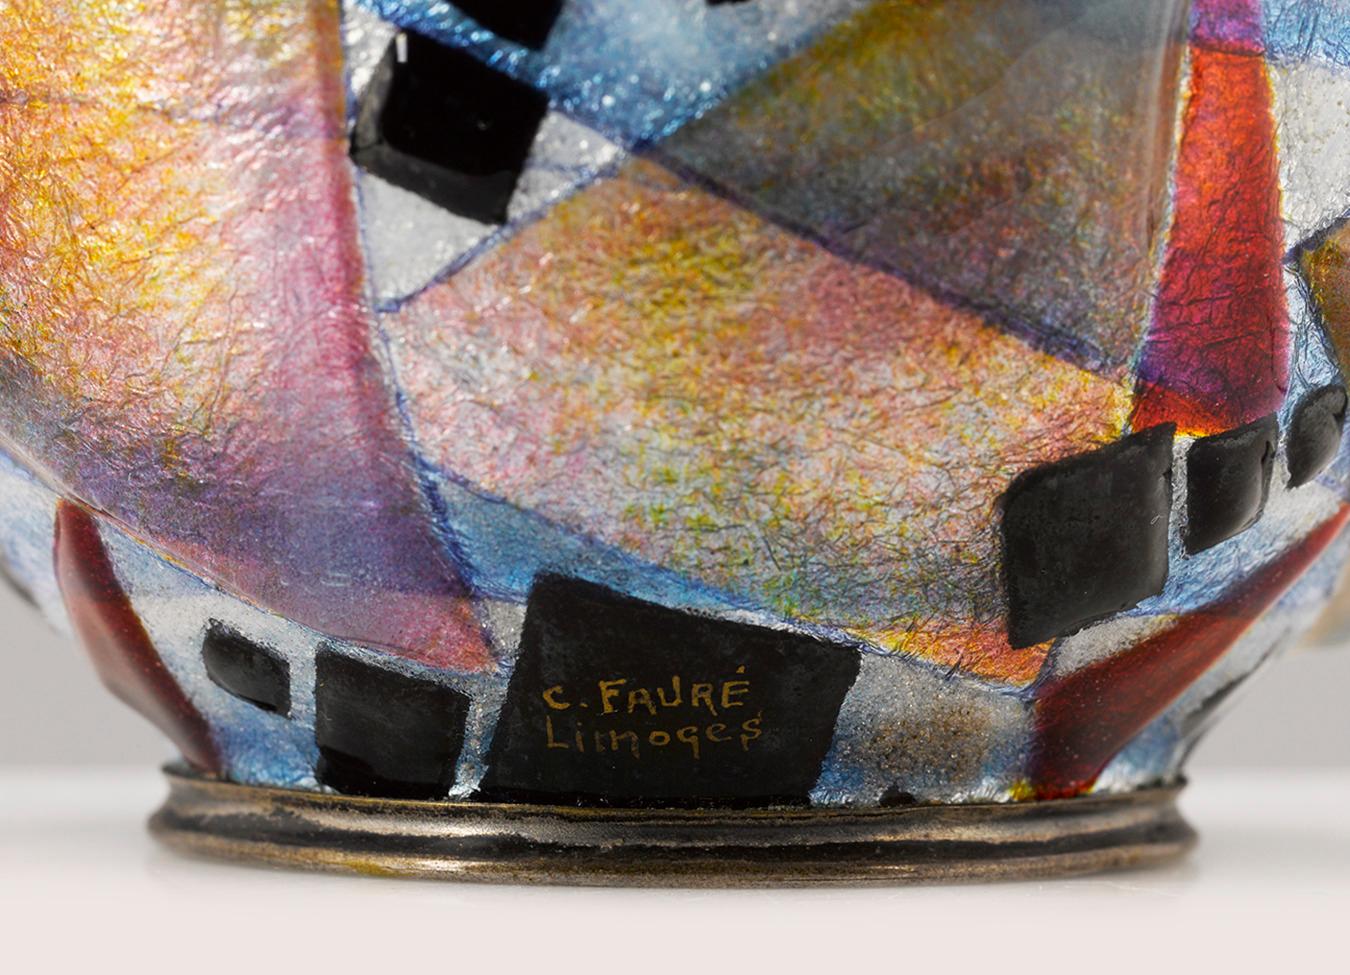 Geometric shapes in vibrant hues dance across the surface of this dynamic vase by the legendary Art Deco enameler, Camille Fauré. Fauré's revolutionary technique of applying layers of enamel in varying thickness across the vase's form gives it a